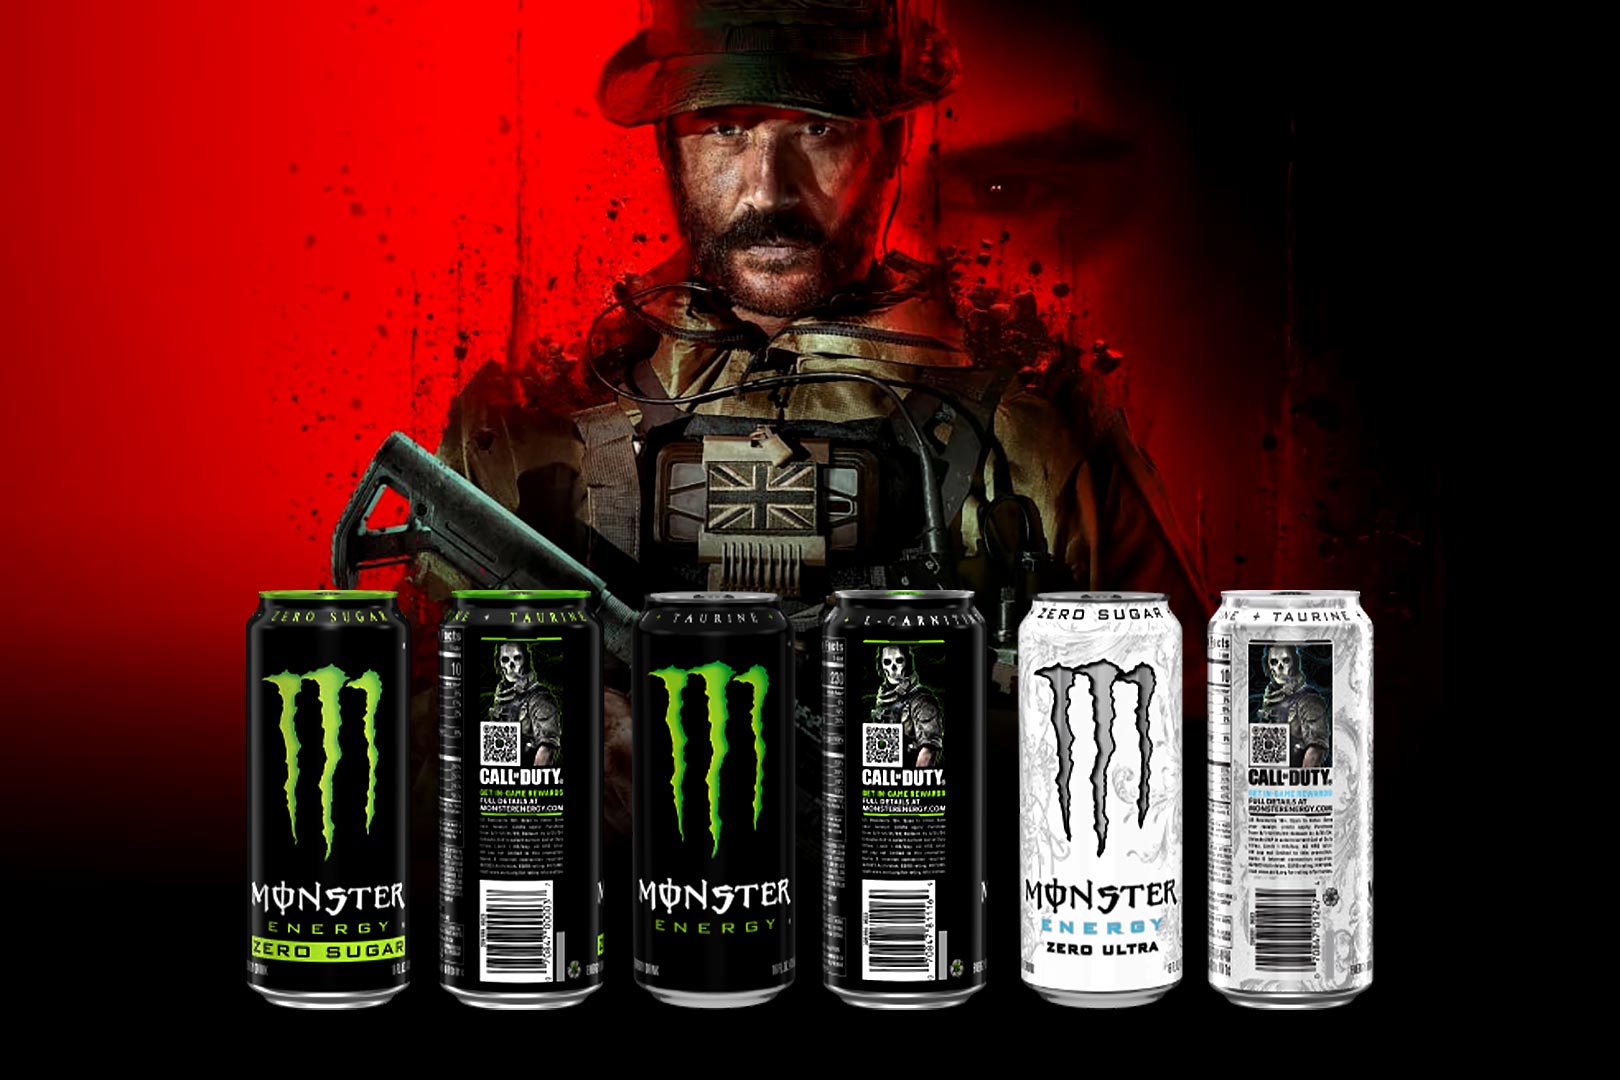 Monster Energy collaboration with Call of Duty Modern Warfare III